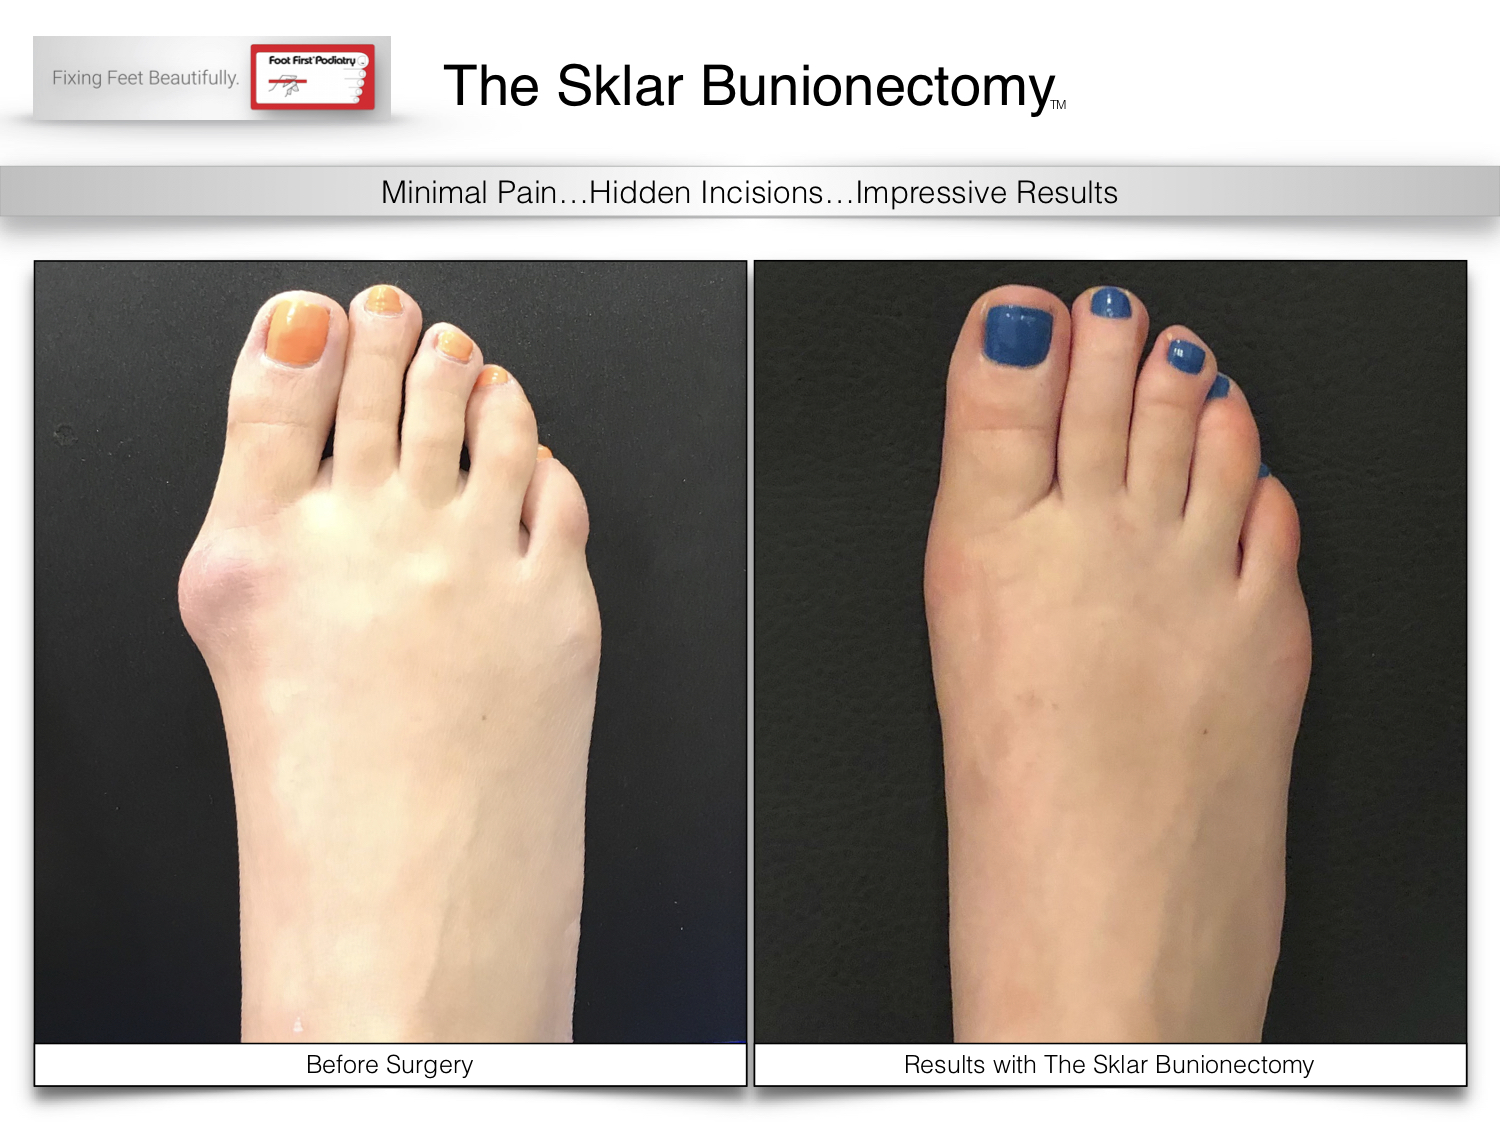 If Foot First can't come to YOU, then Travel to Foot First for Bunion Surgery...